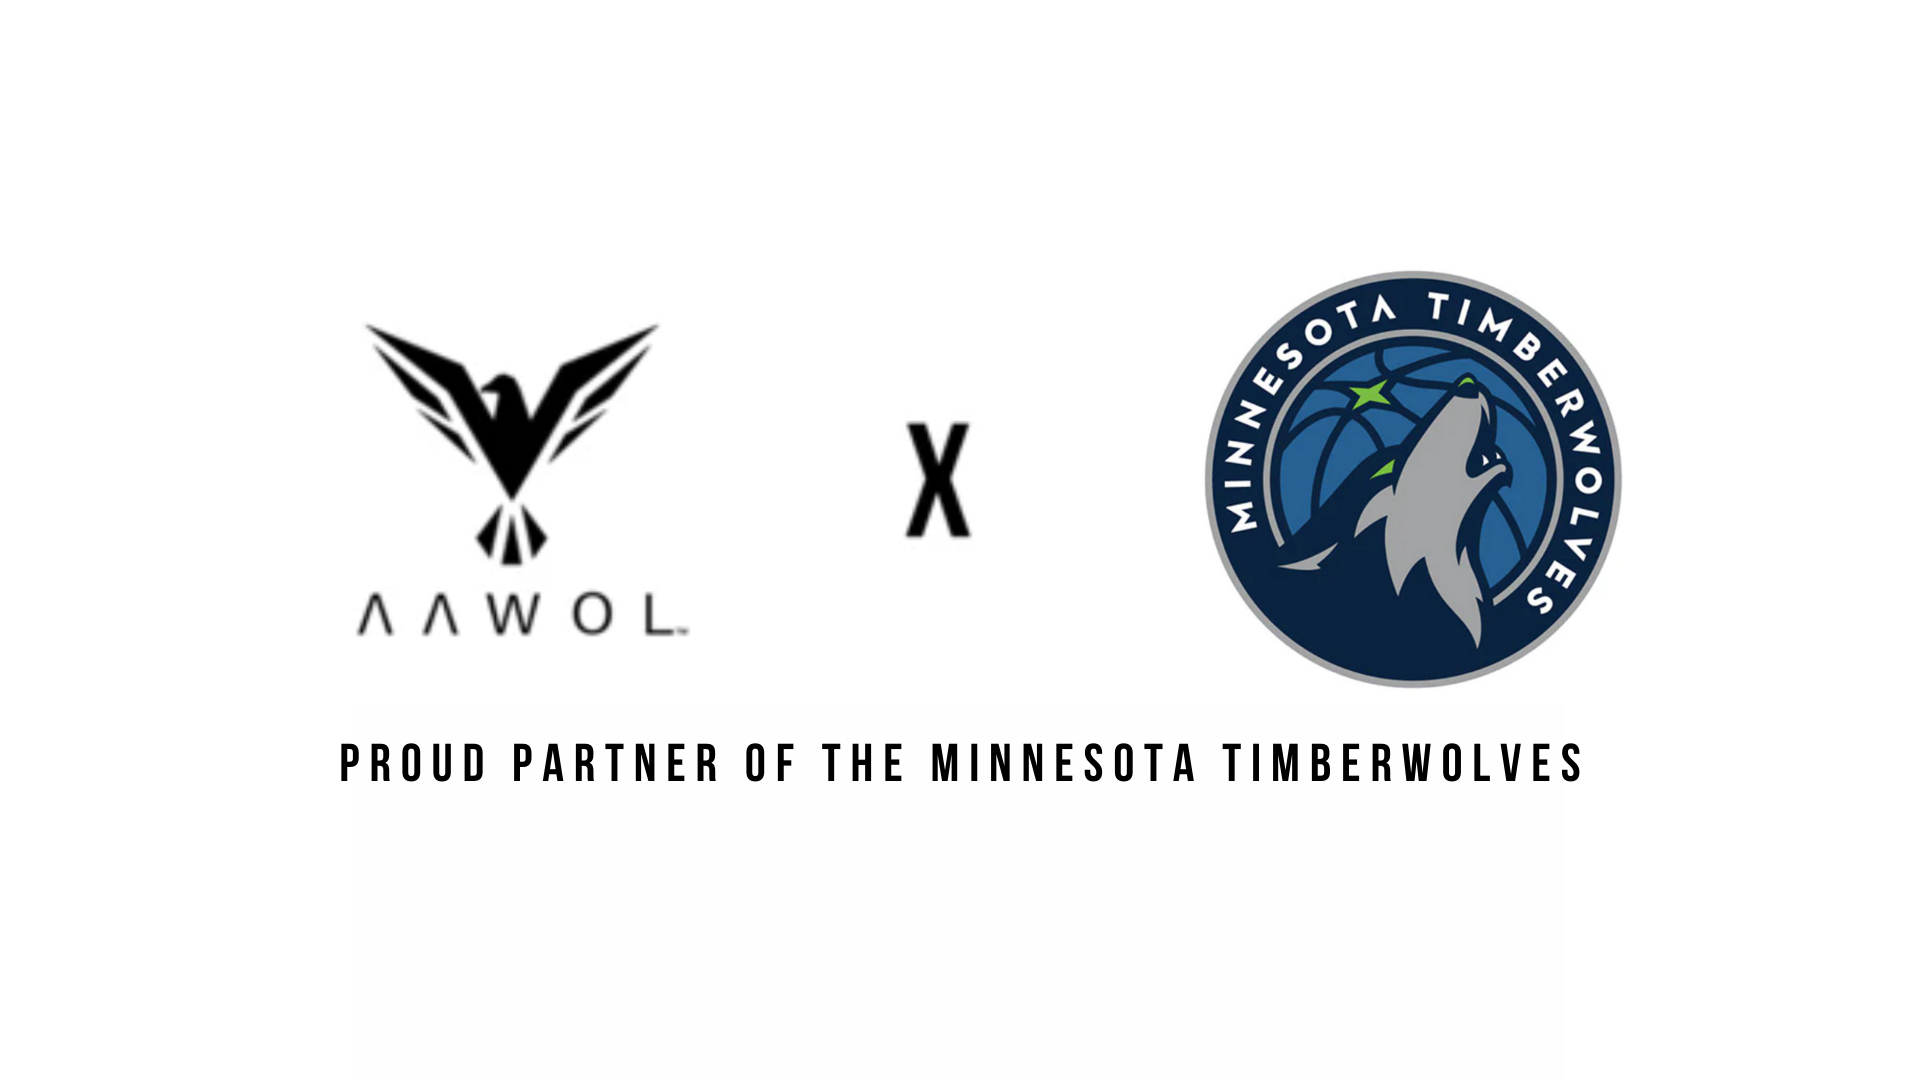 TIMBERWOLVES AND AAWOL ANNOUNCE PARTNERSHIP